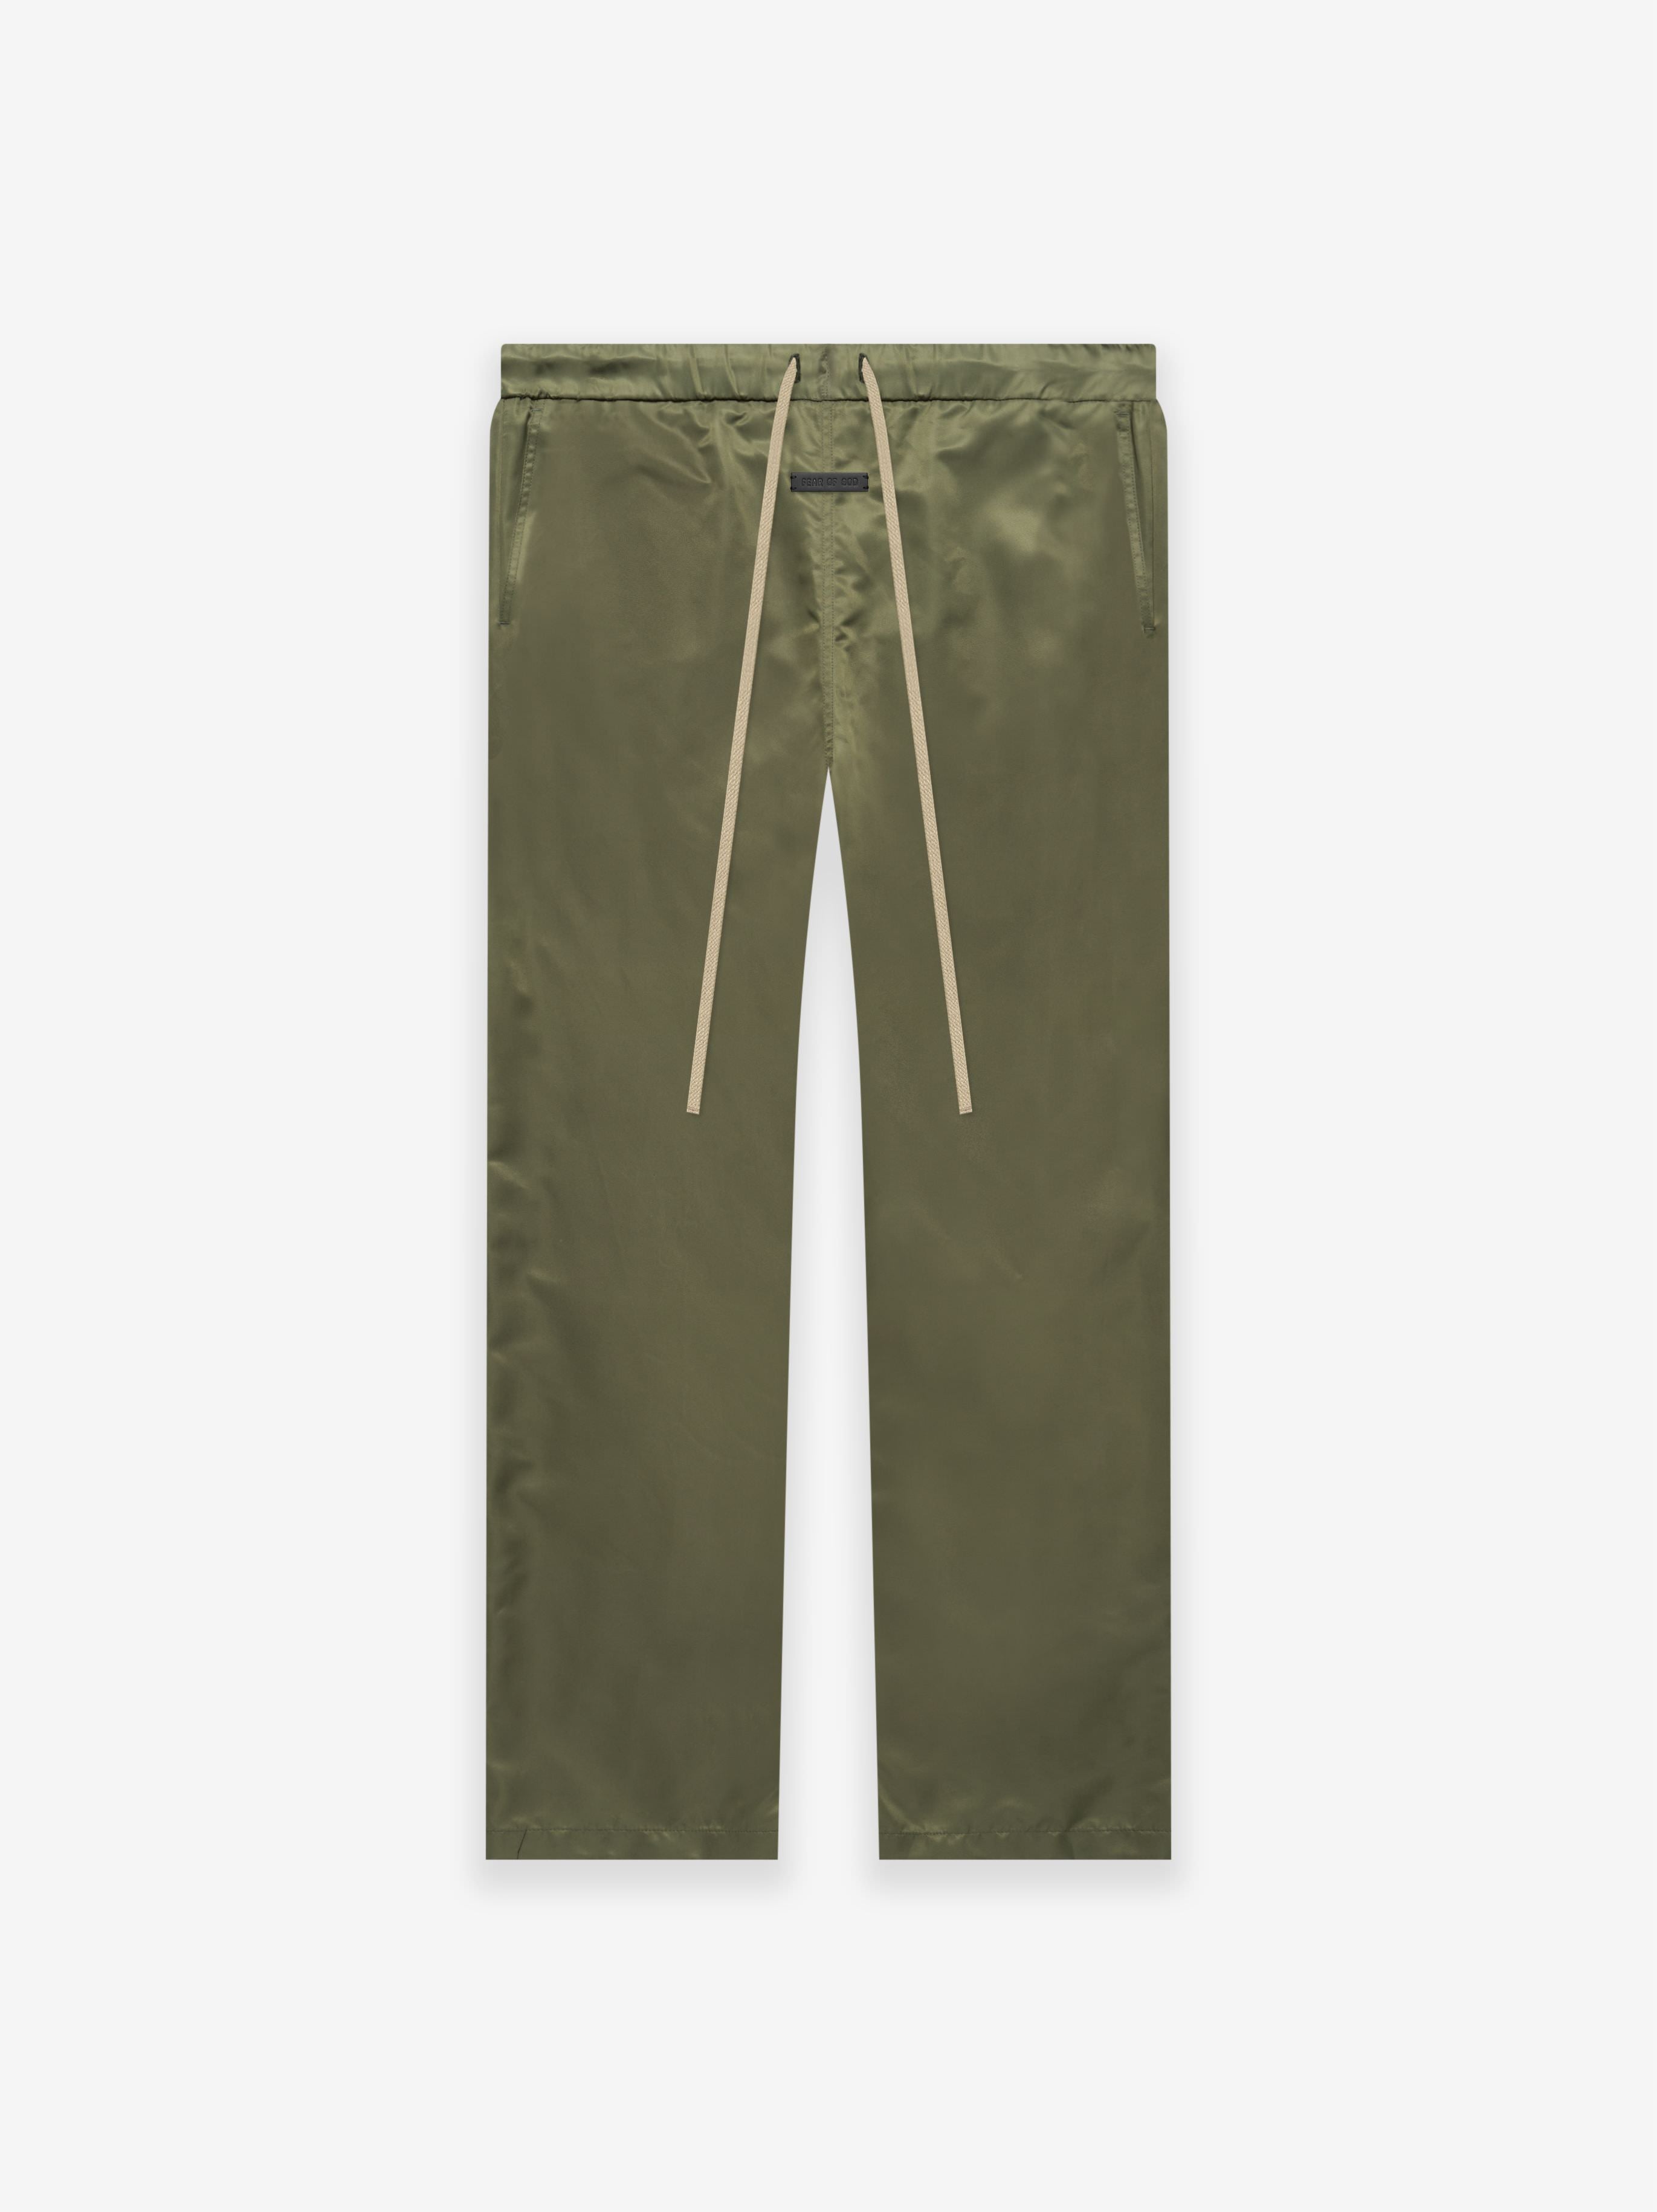 Fear of God Eternal Nylon Twill Relaxed Pant in Olive | Fear of God